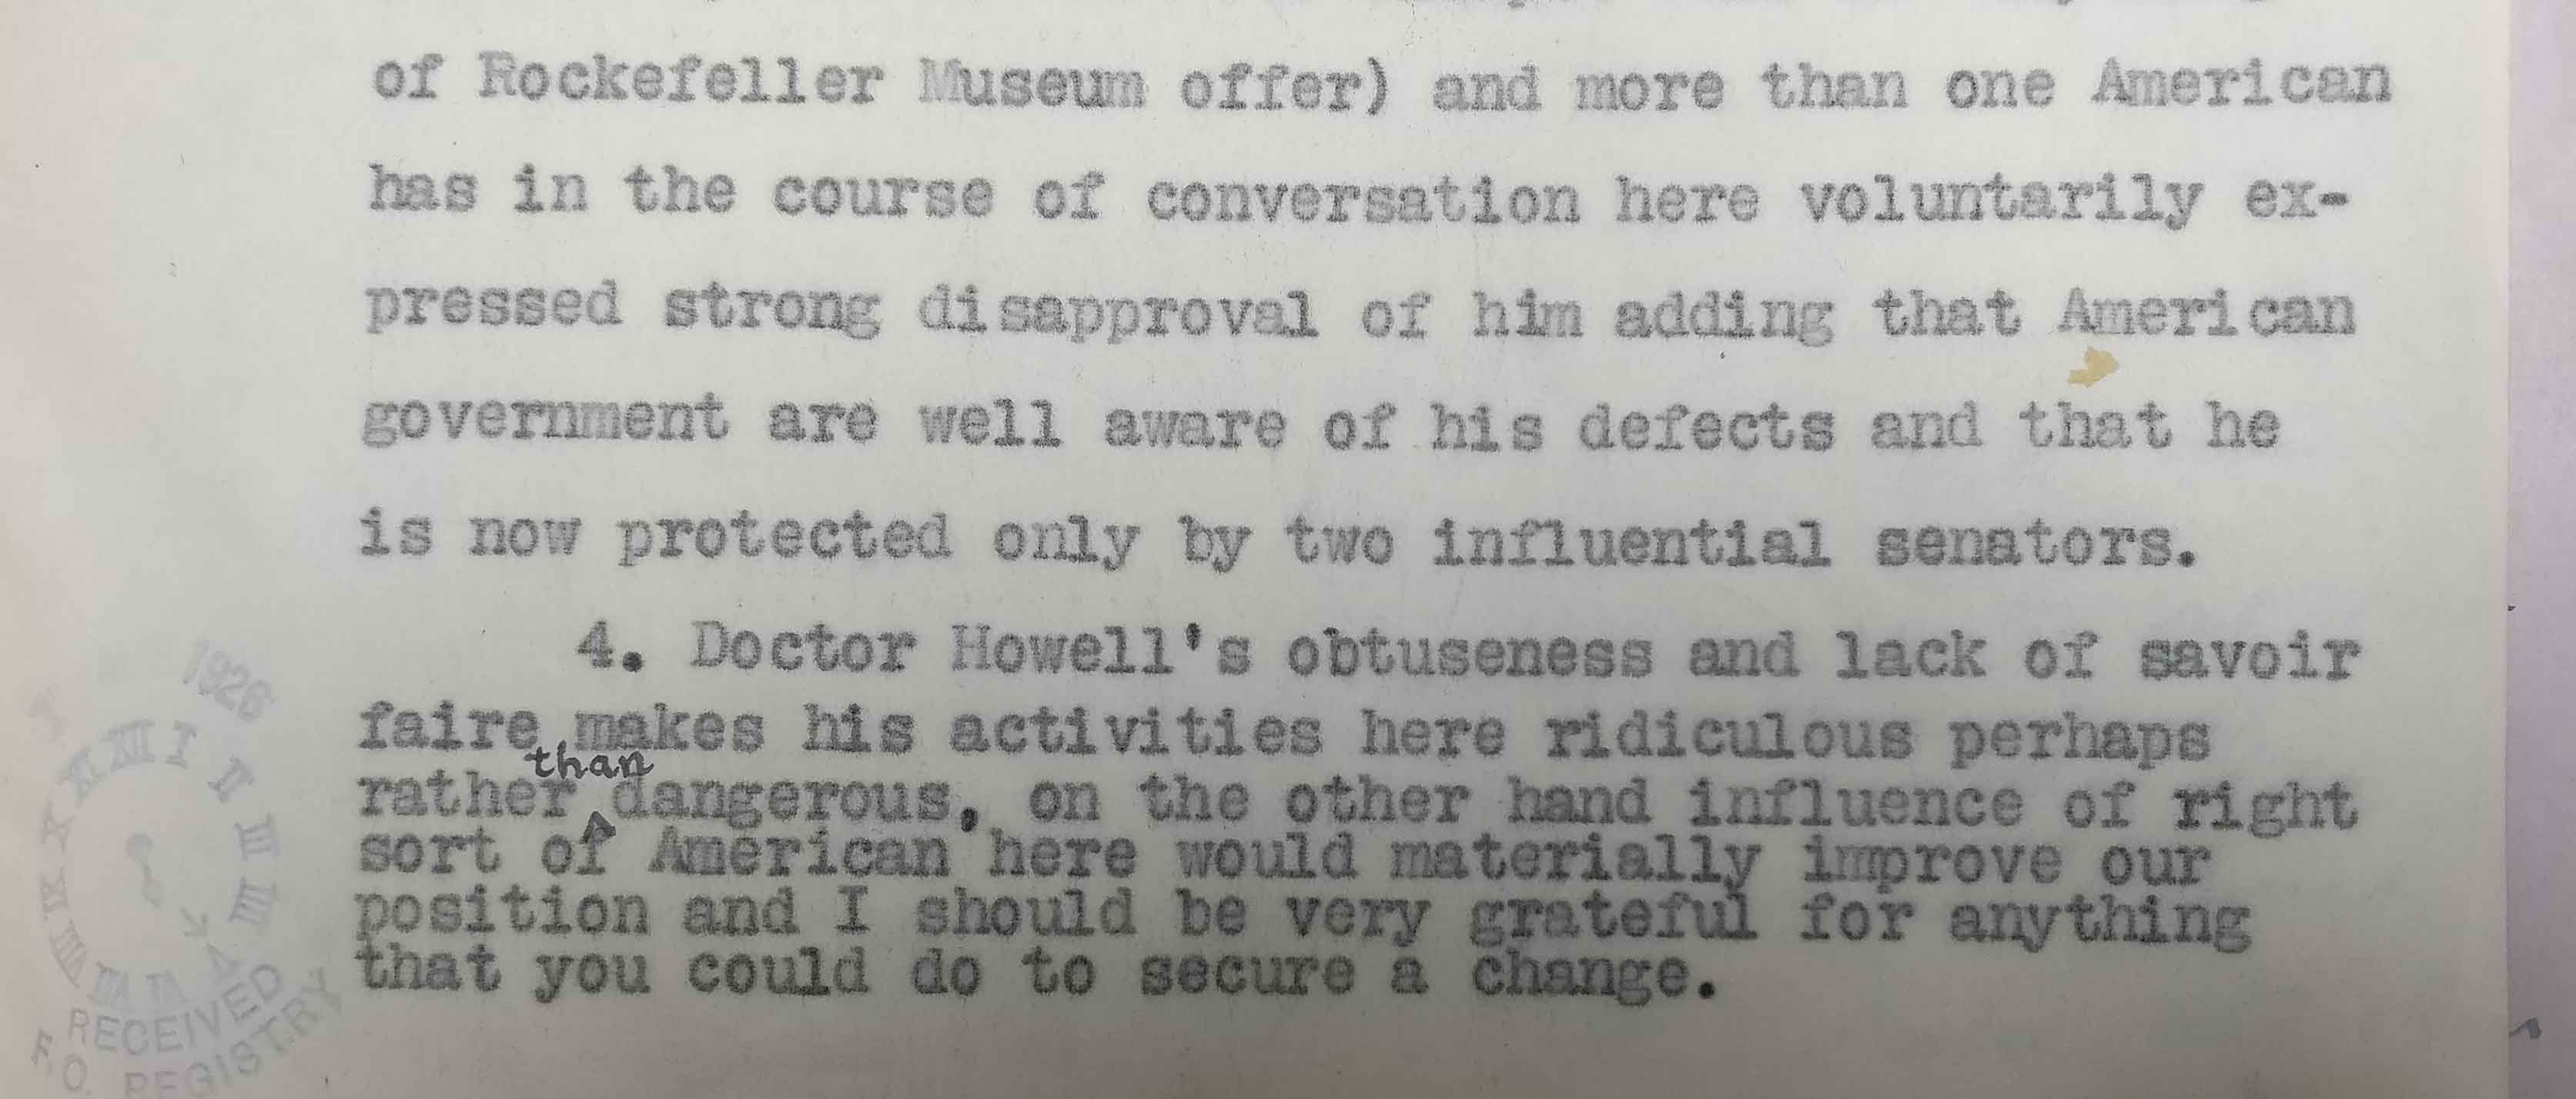 A short extract (12 lines) of a letter from George Lloyd to the Foreign Office, written on 1 March 1926 (catalogue reference: FO 371/11608).